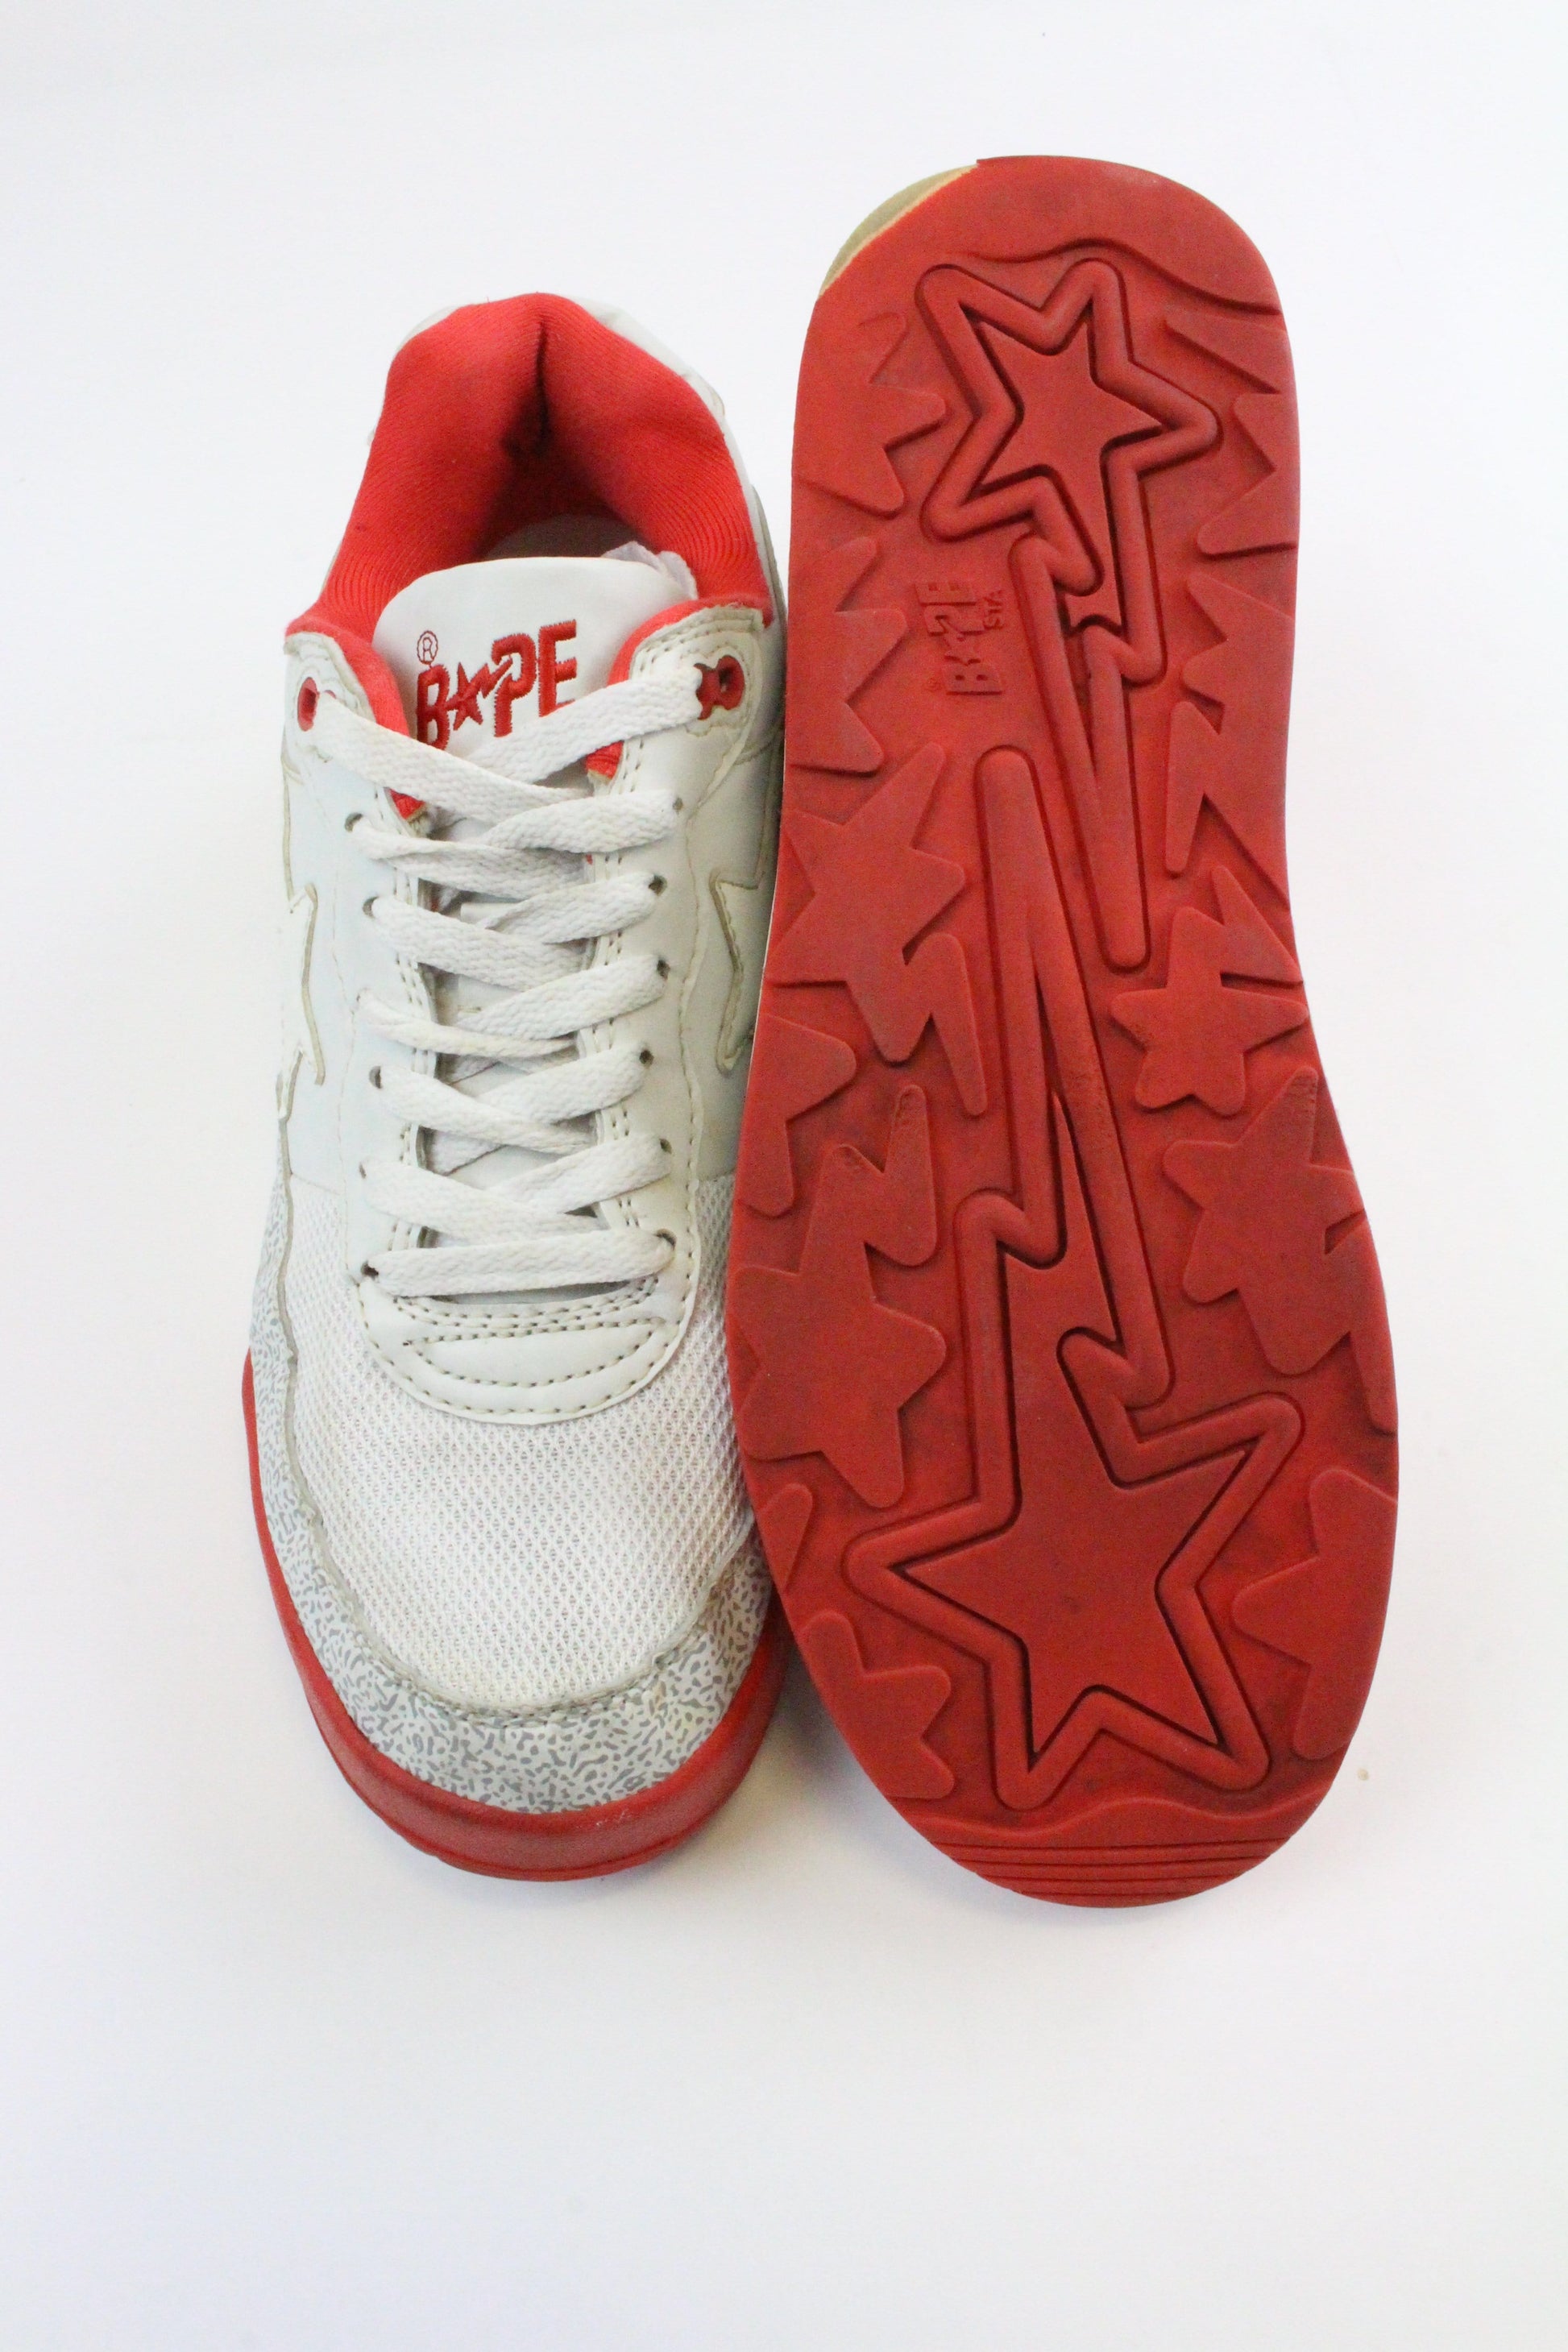 Bape Cement & Red Roadstas - SaruGeneral